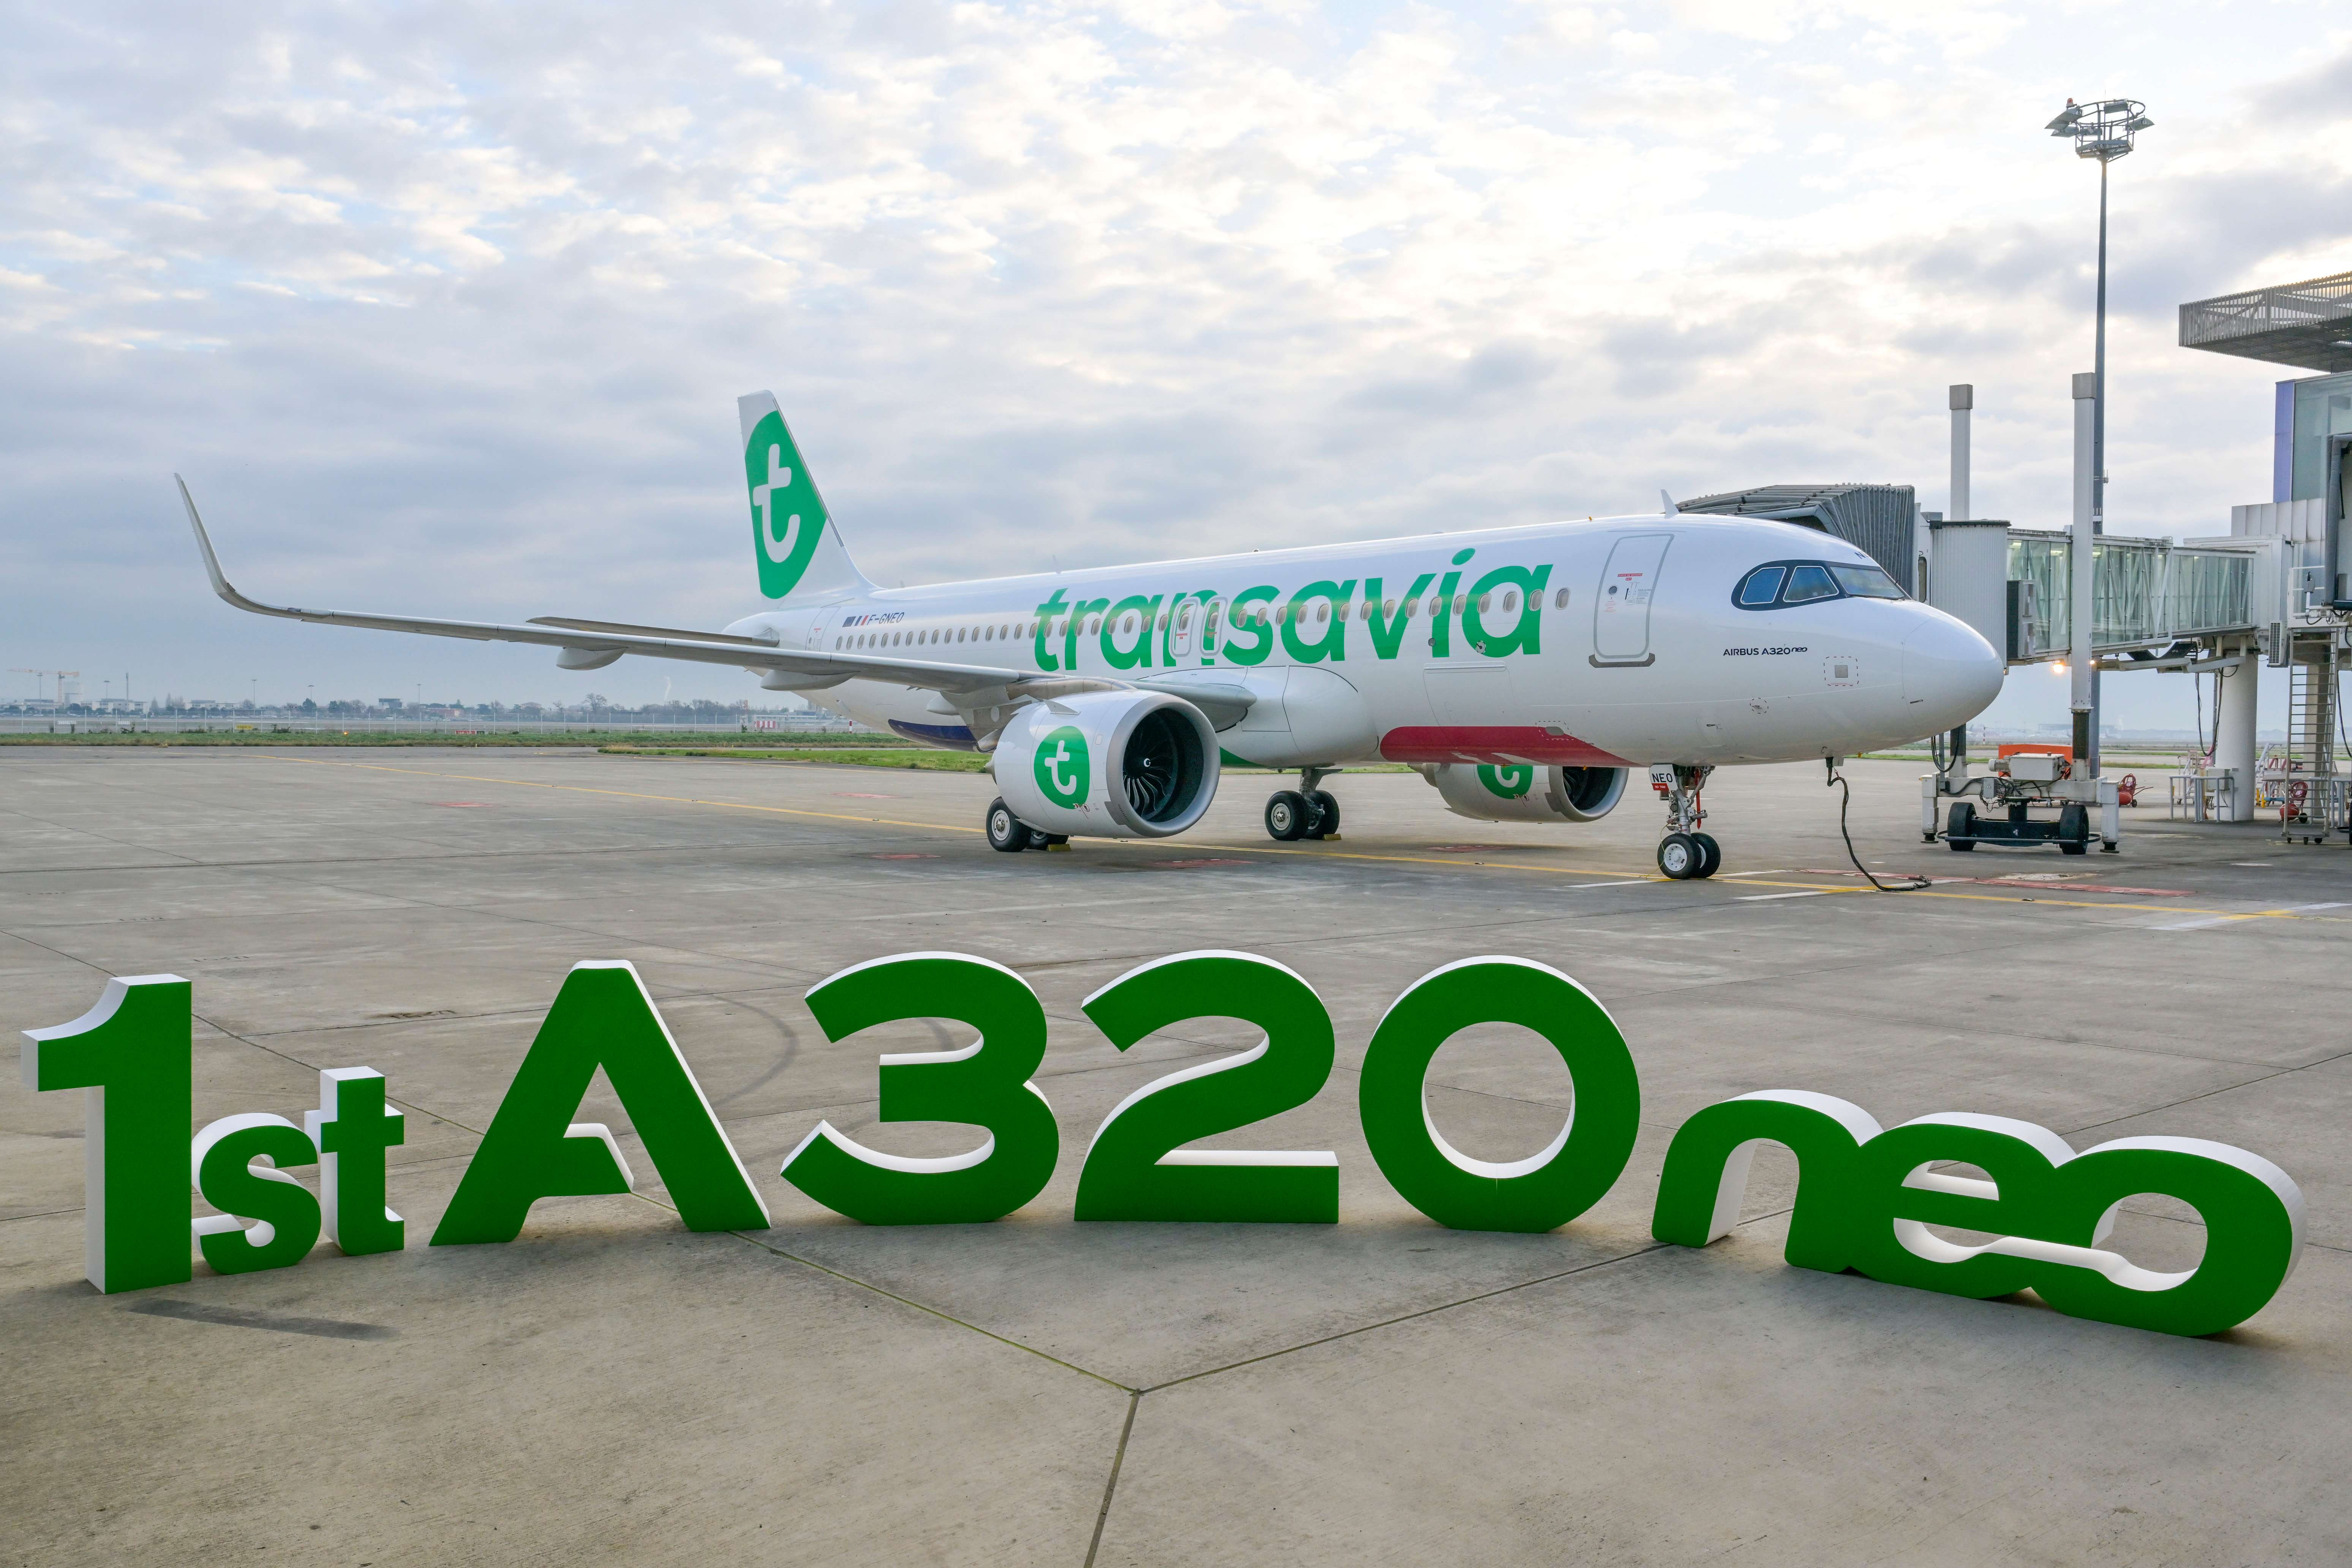 Transavia France takes delivery of its first A320neo